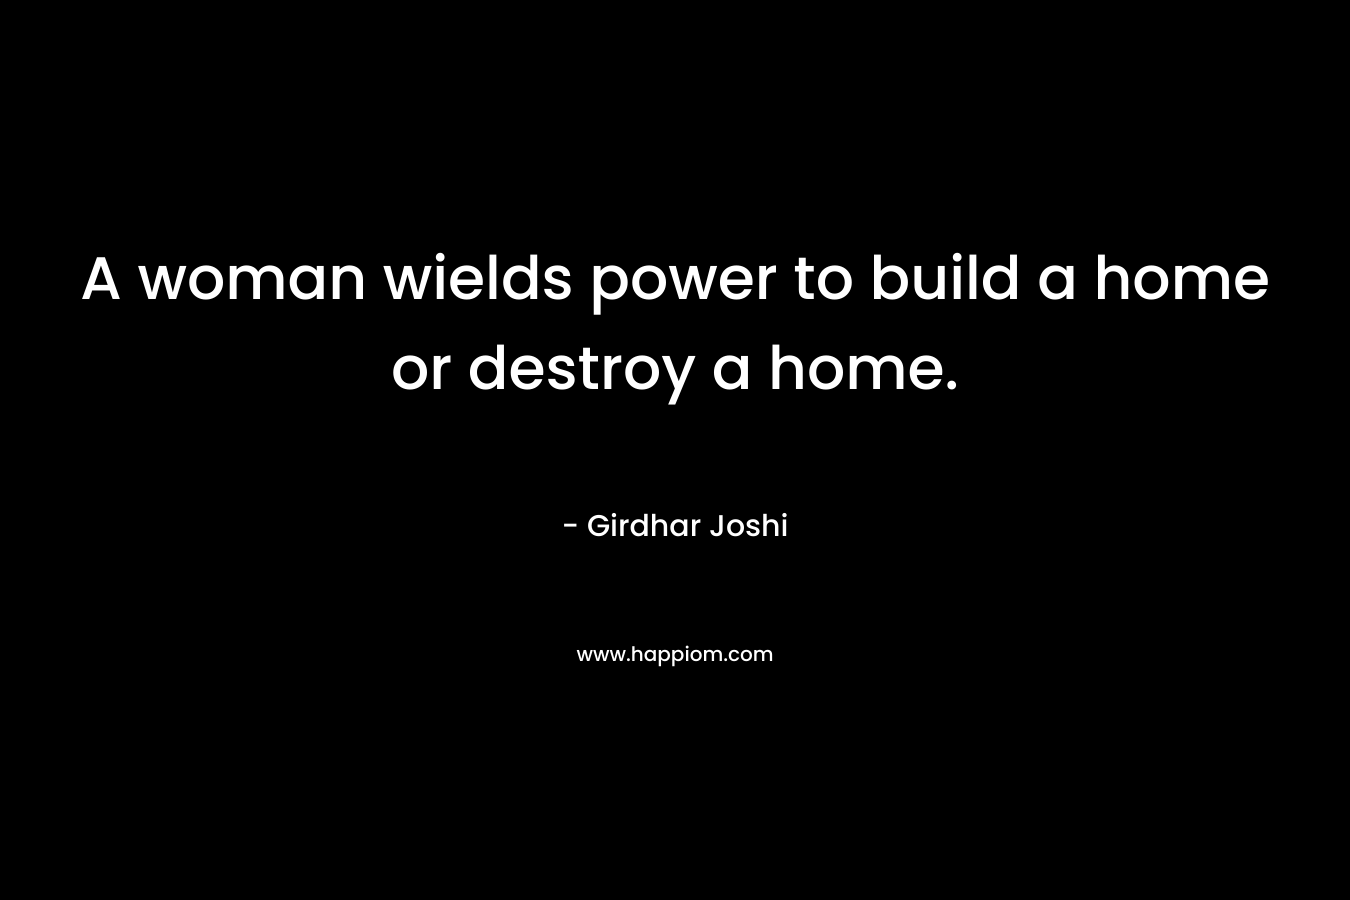 A woman wields power to build a home or destroy a home.